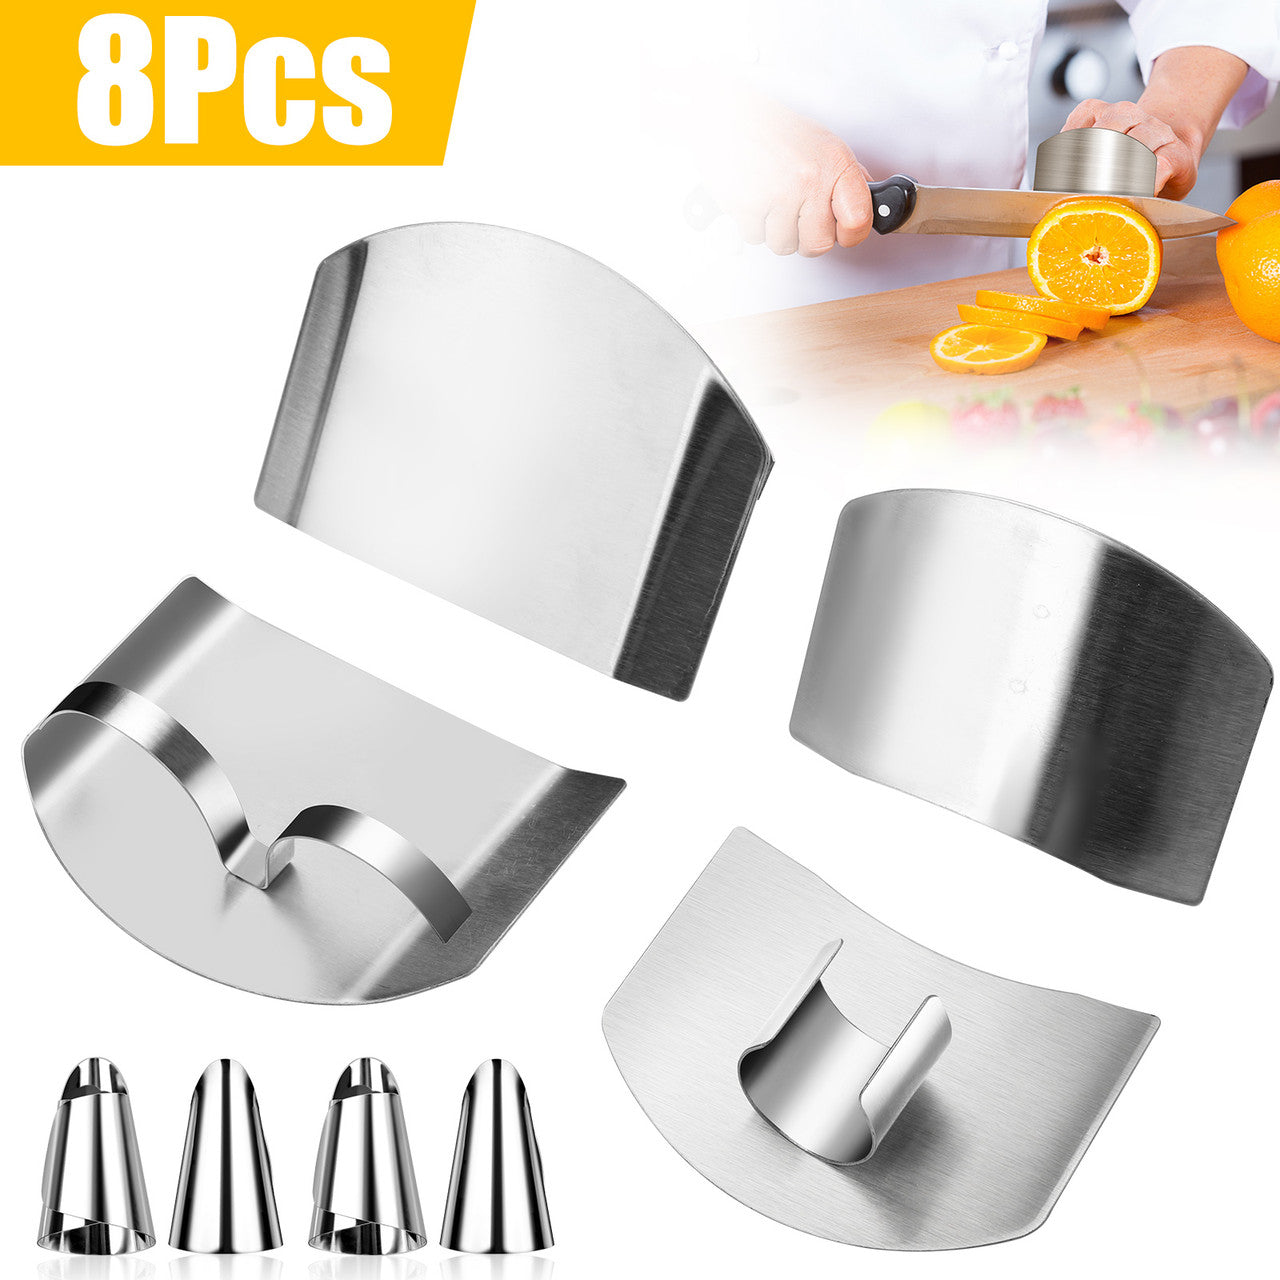 8 Pcs 304 Stainless Steel Finger Guard - Cutting Protector Adjustable Safe Thumb Guard Finger Protector for Chefs Kitchen Staff (Silver)